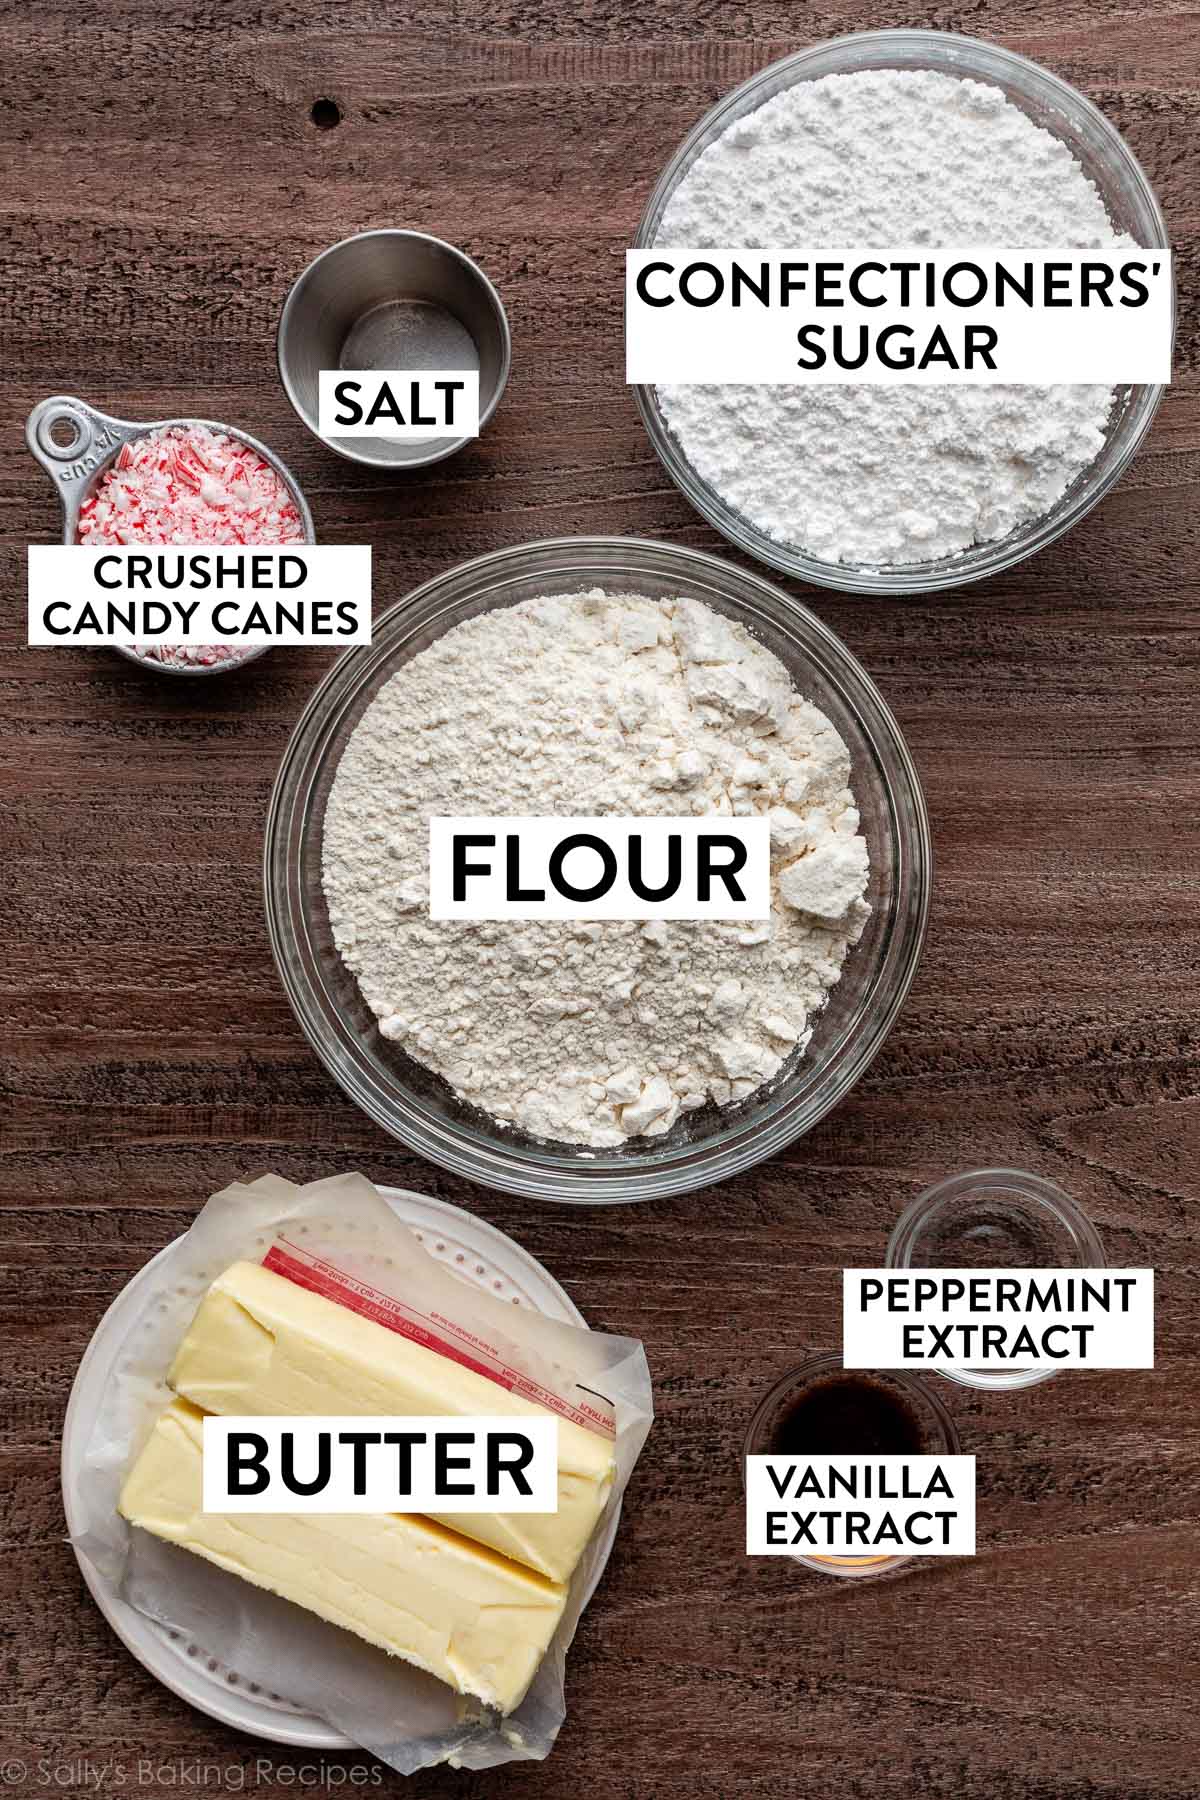 ingredients on brown background including flour, butter, confectioners' sugar, and crushed candy canes.